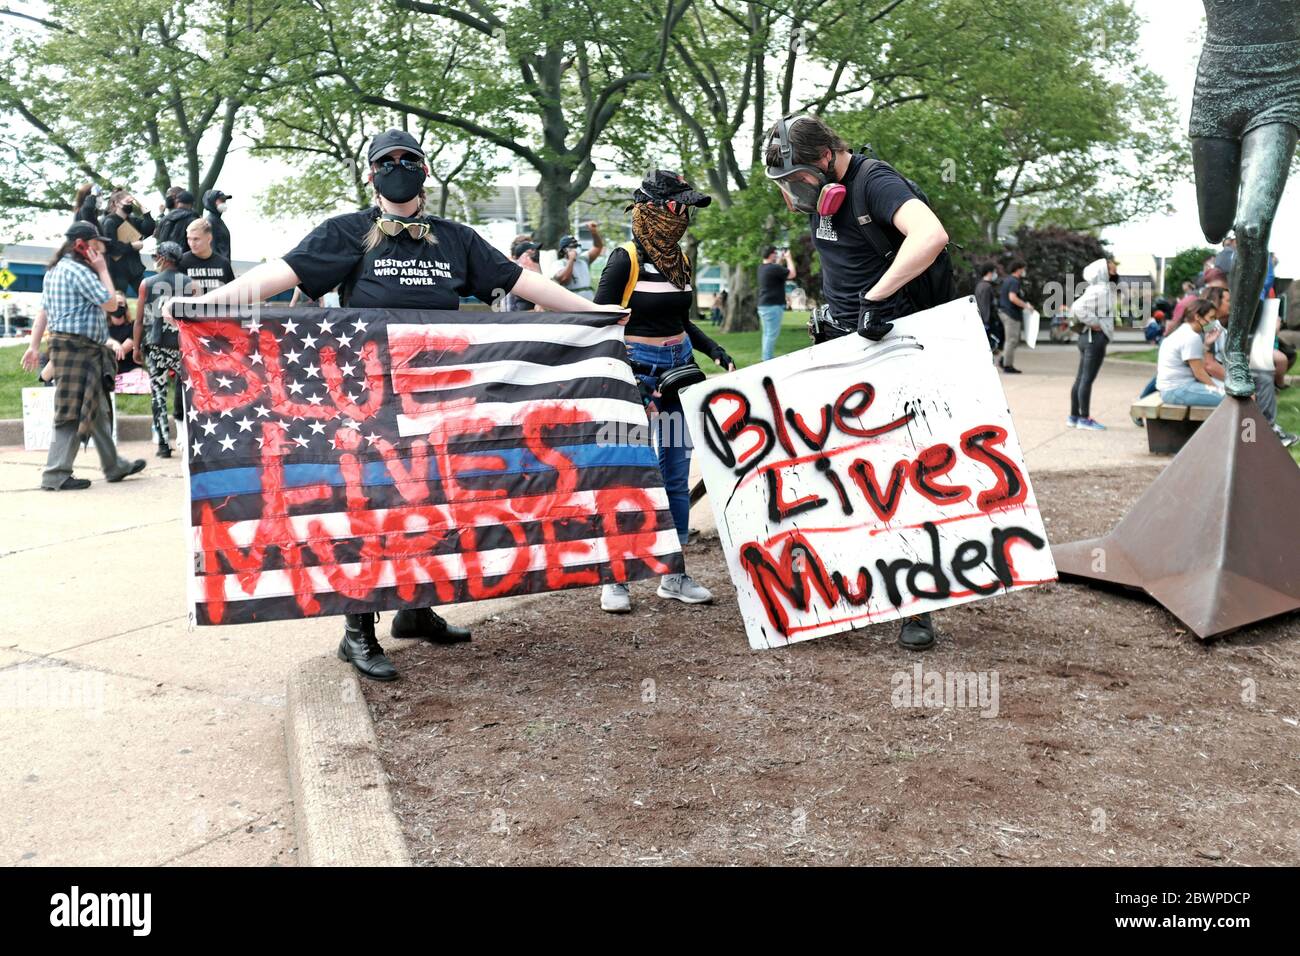 Protesters in Cleveland, Ohio, USA hold signs stating Blue Lives Murder during protests against the murder of George Floyd in the hands of police. Stock Photo